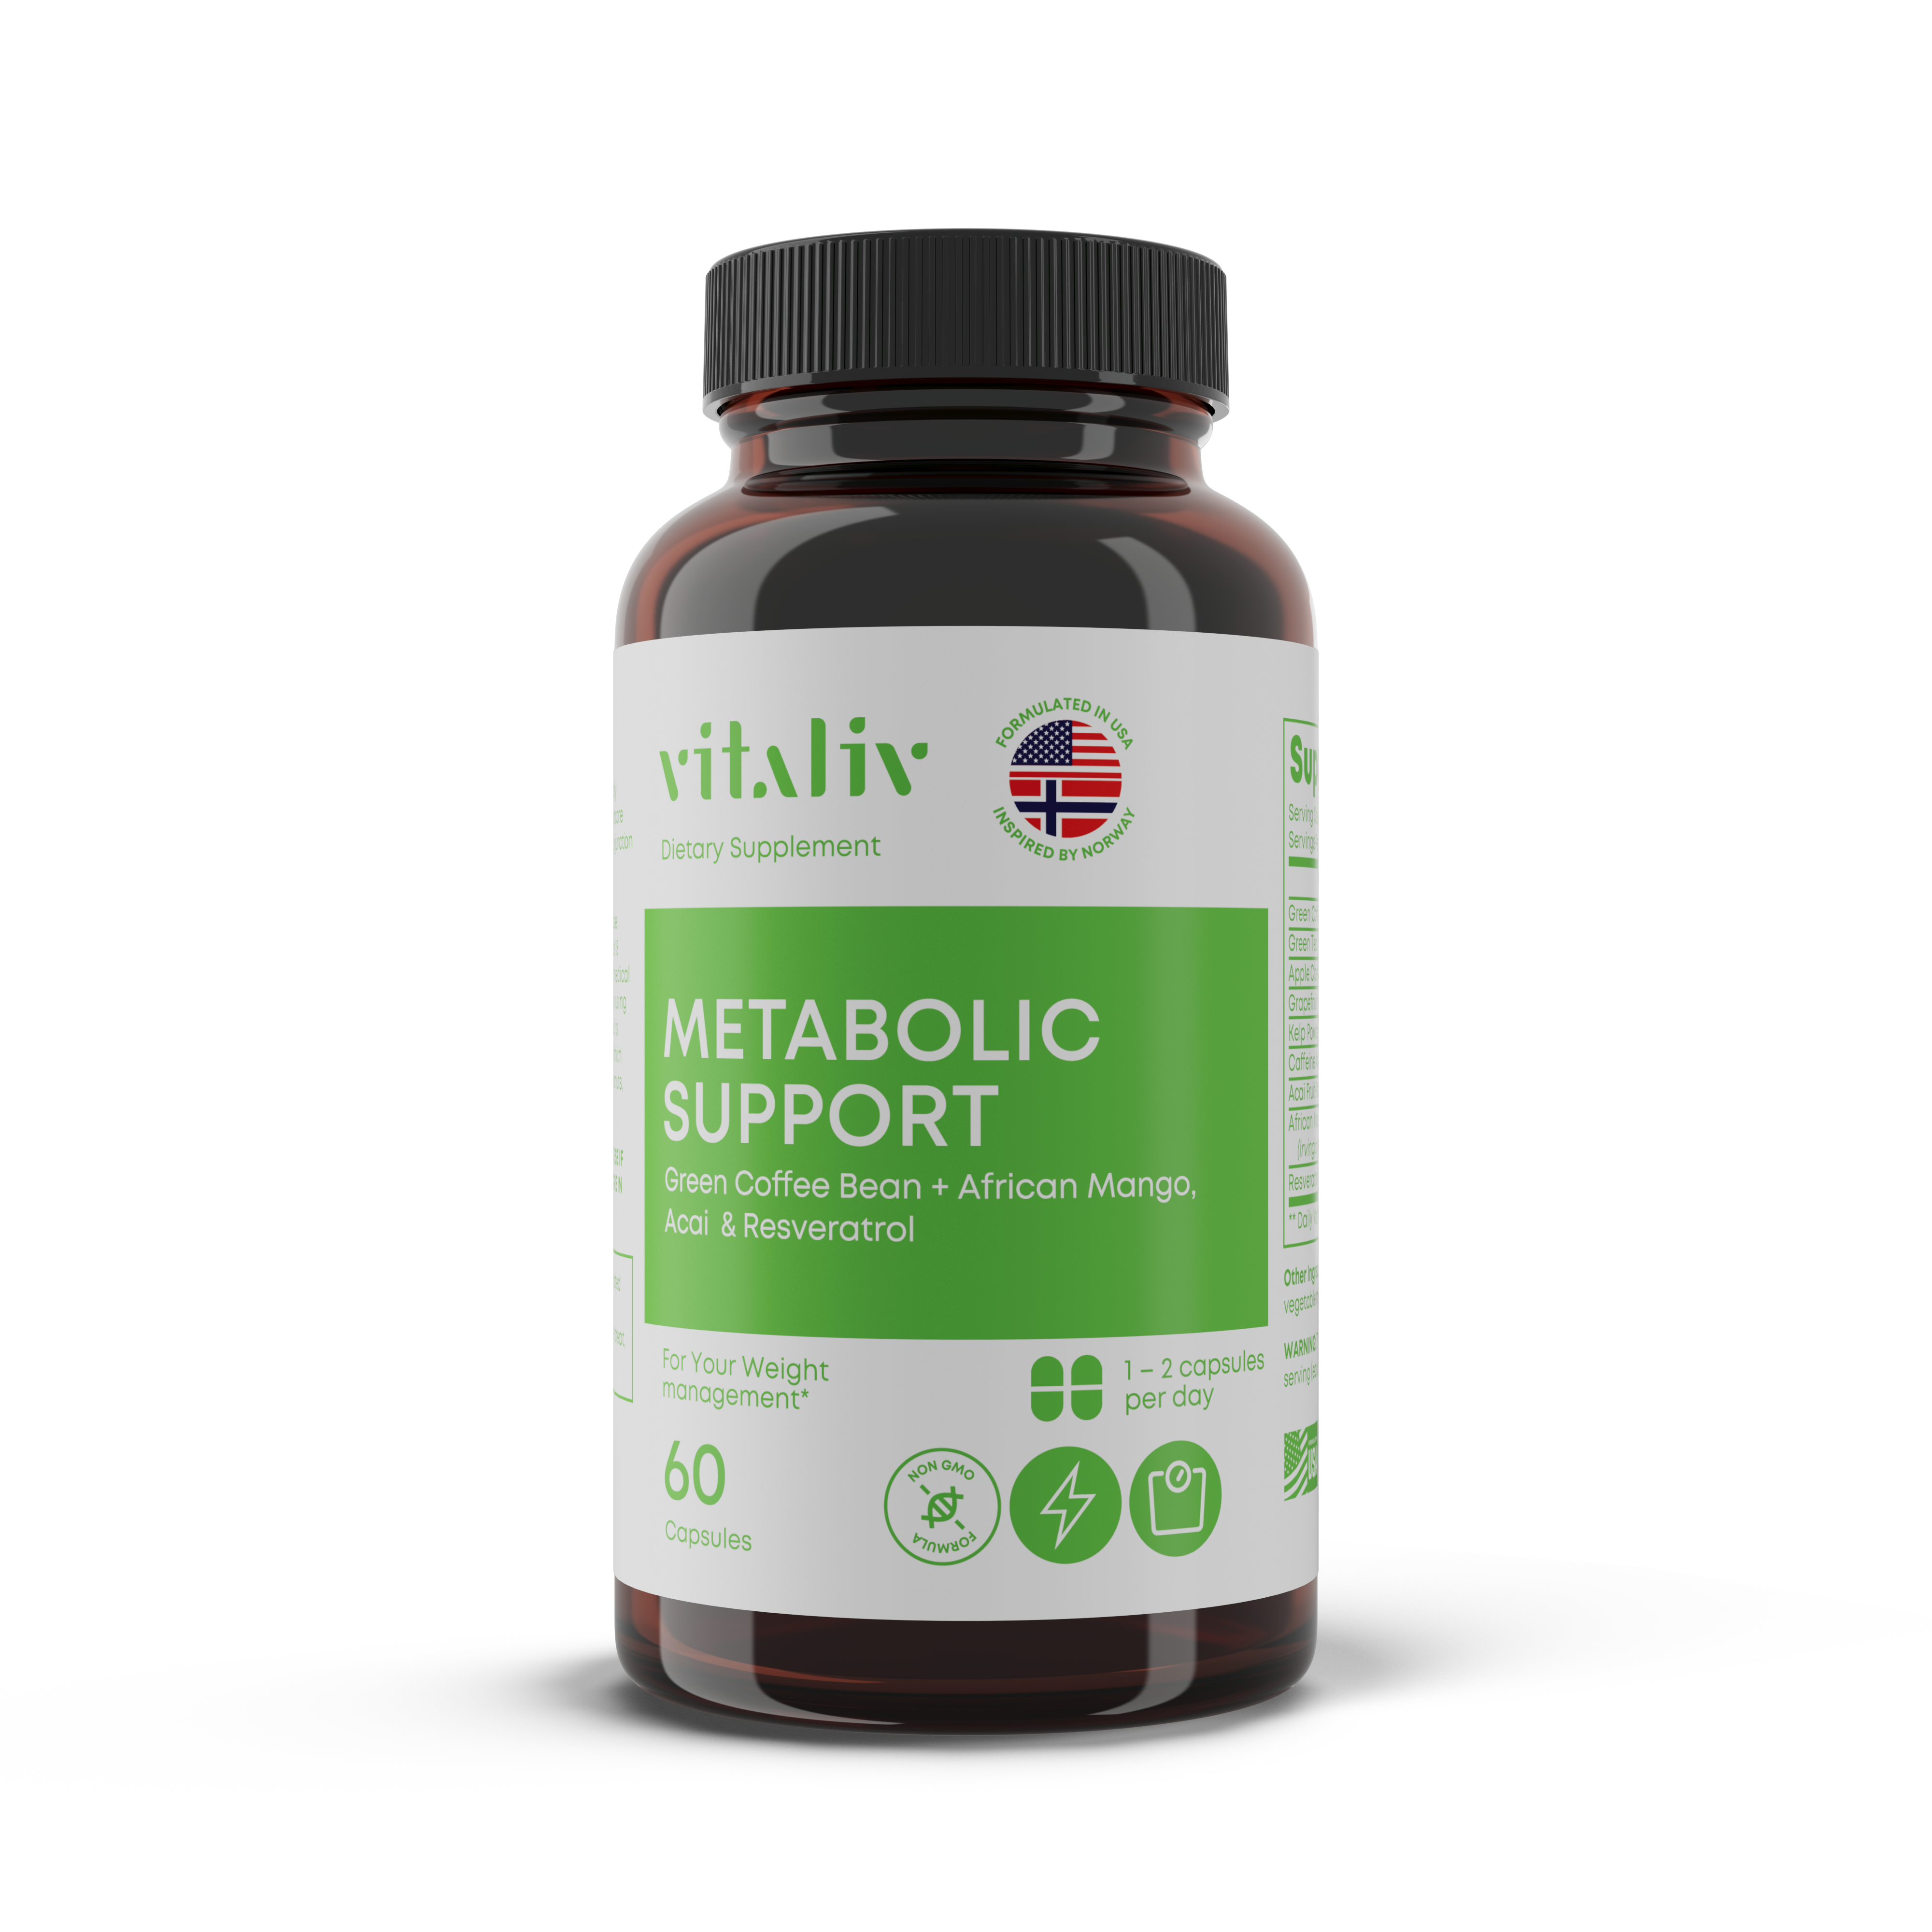 Metabolic support for energy